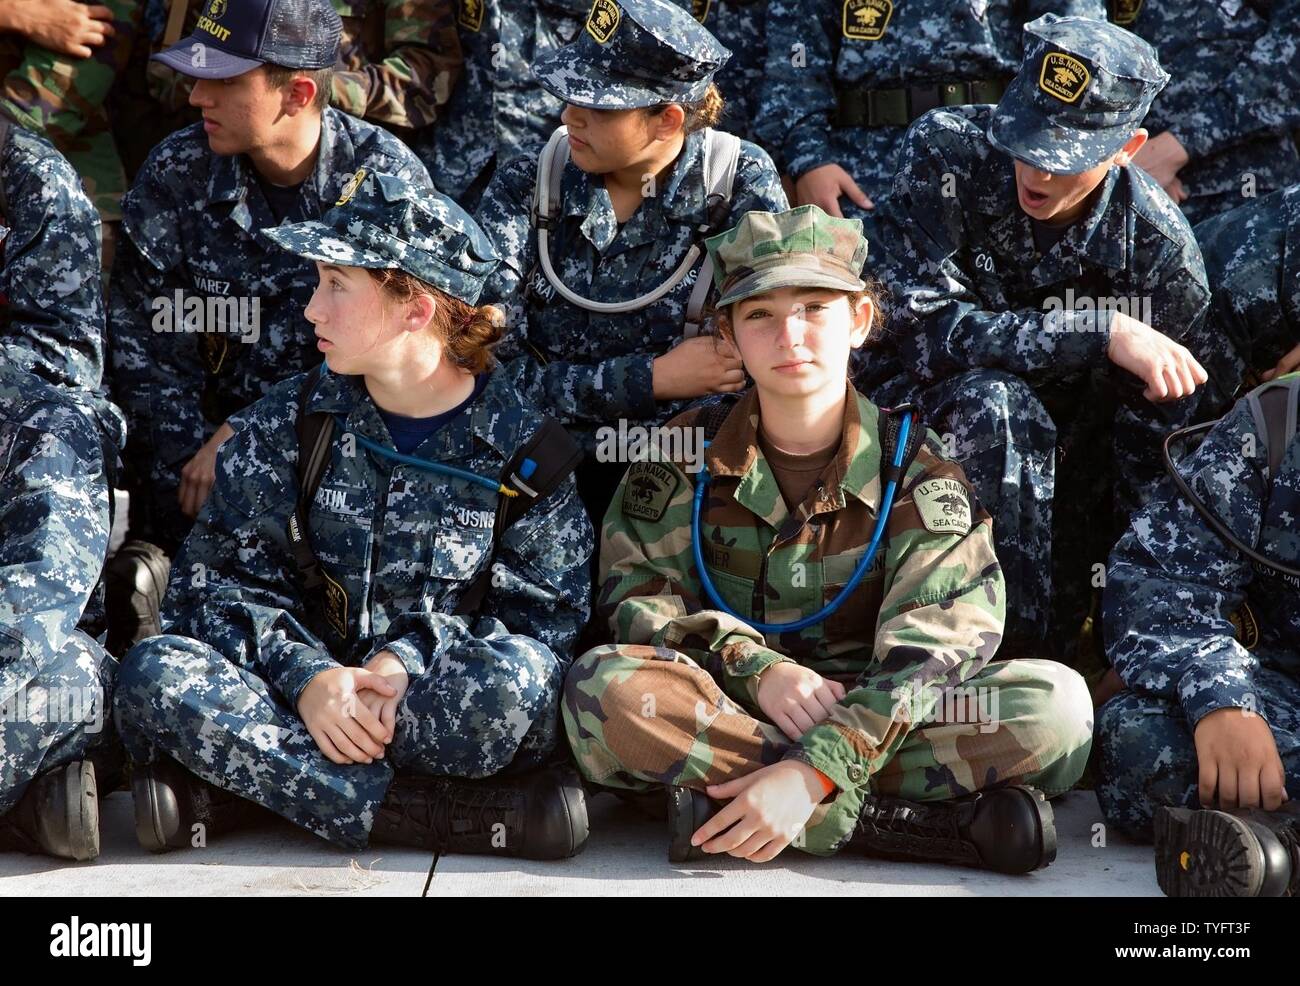 FORT PIERCE, Fla. (Nov. 6, 2016) U.S. Naval Sea Cadet Corps Seaman Recruit Terner, Palm Beach Division, waits for her shipmates to get settled for a group photo. Cadets are not required to join the armed services upon graduation; however, when they do, according to former Chief of Naval Operations Adm. Gary Roughead, each cadet who enlists saves the Navy more than $14,000 in life-cycle training costs. Stock Photo